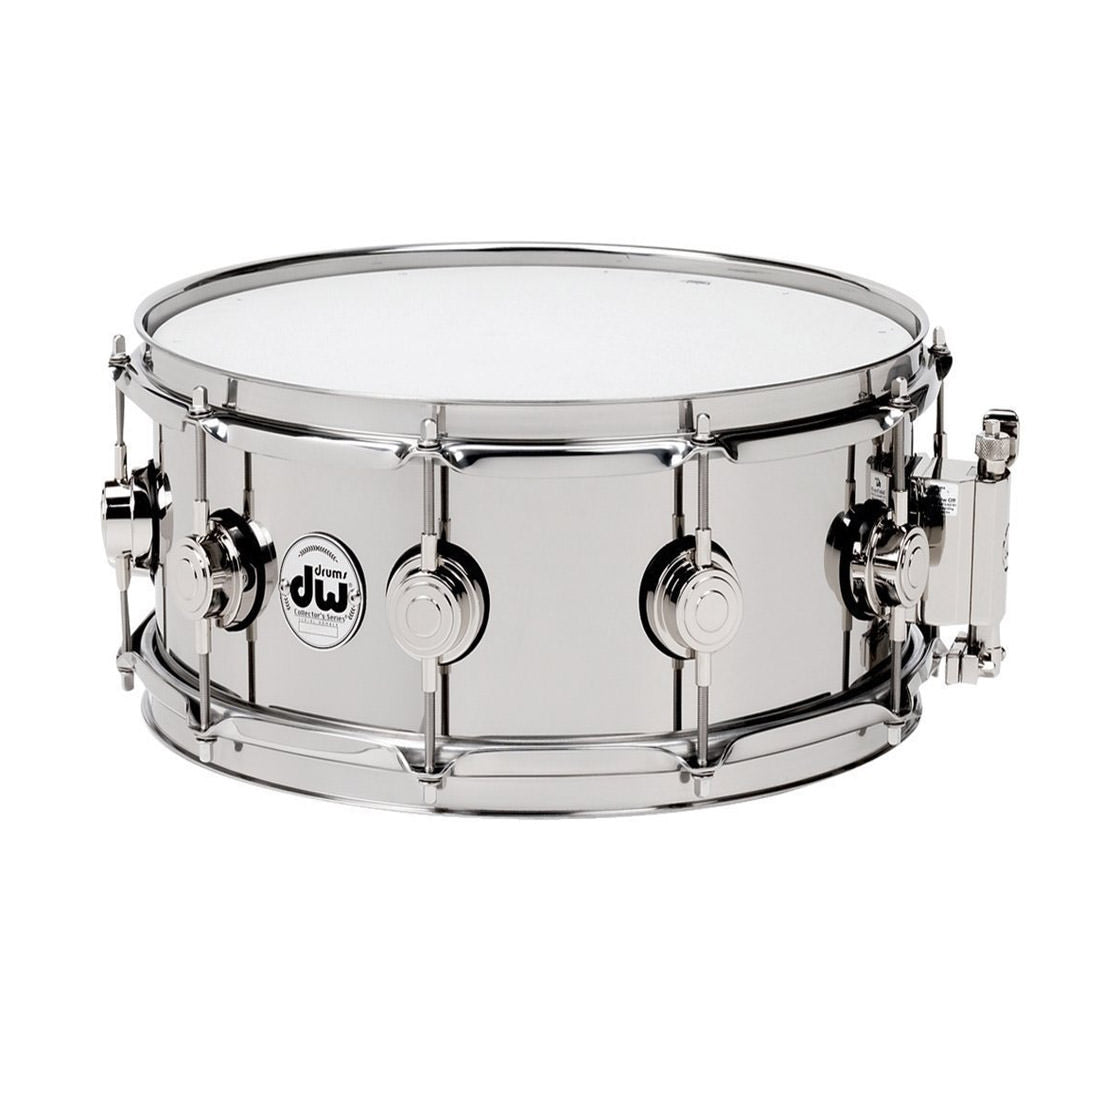 DW Collector's Series 13"x6.5" Stainless Steel Snare